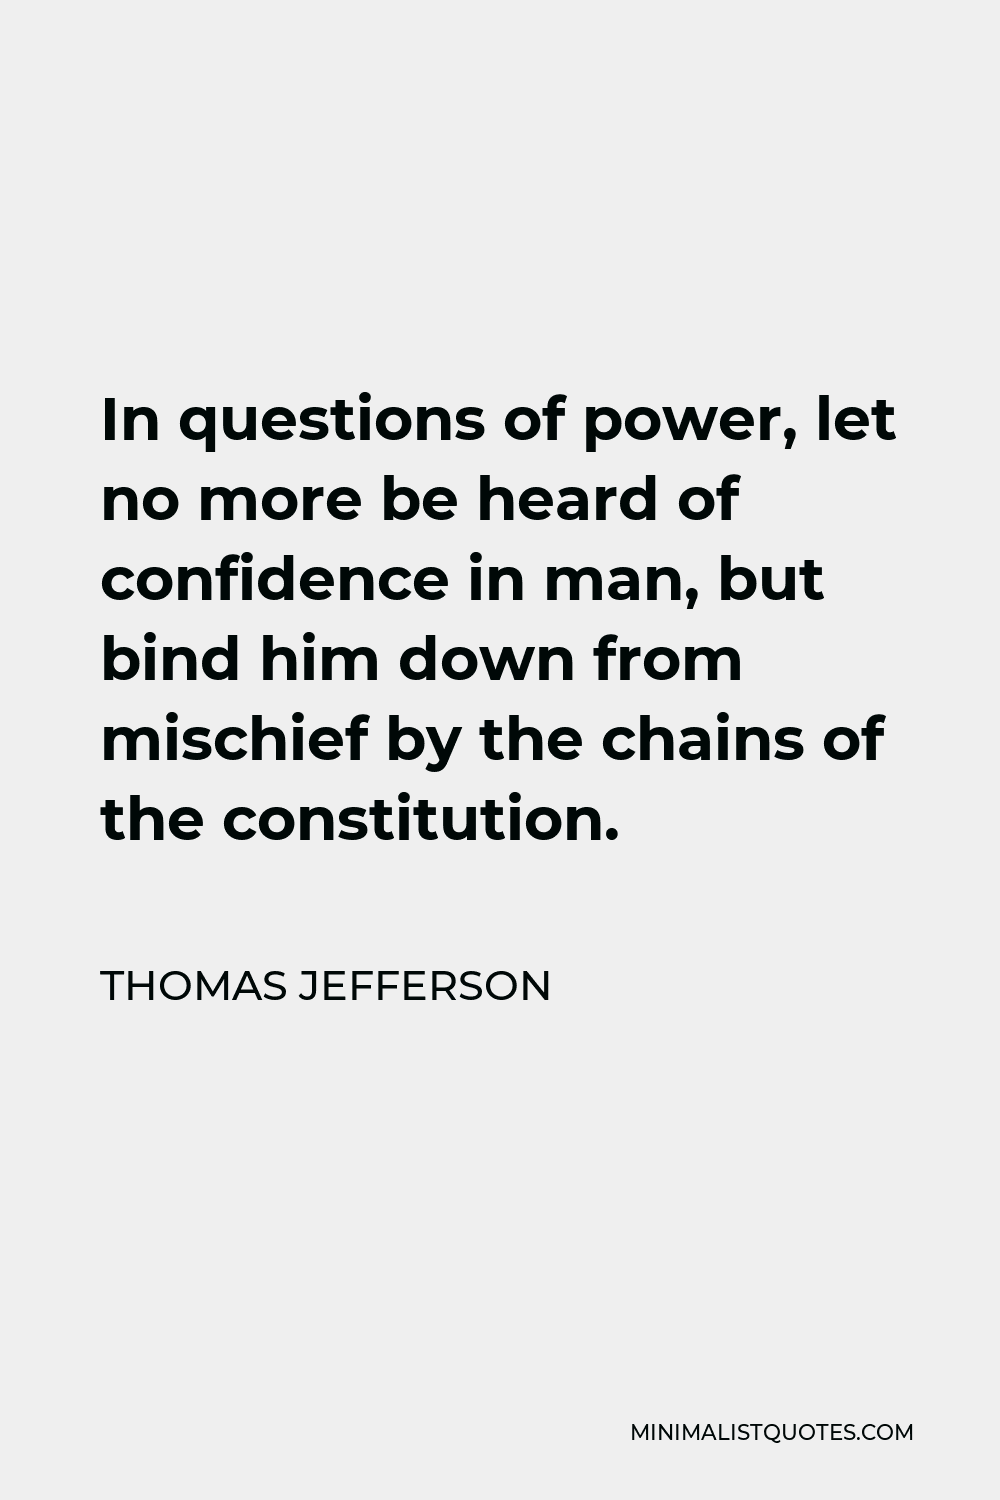 Thomas Jefferson Quote - In questions of power, let no more be heard of confidence in man, but bind him down from mischief by the chains of the constitution.